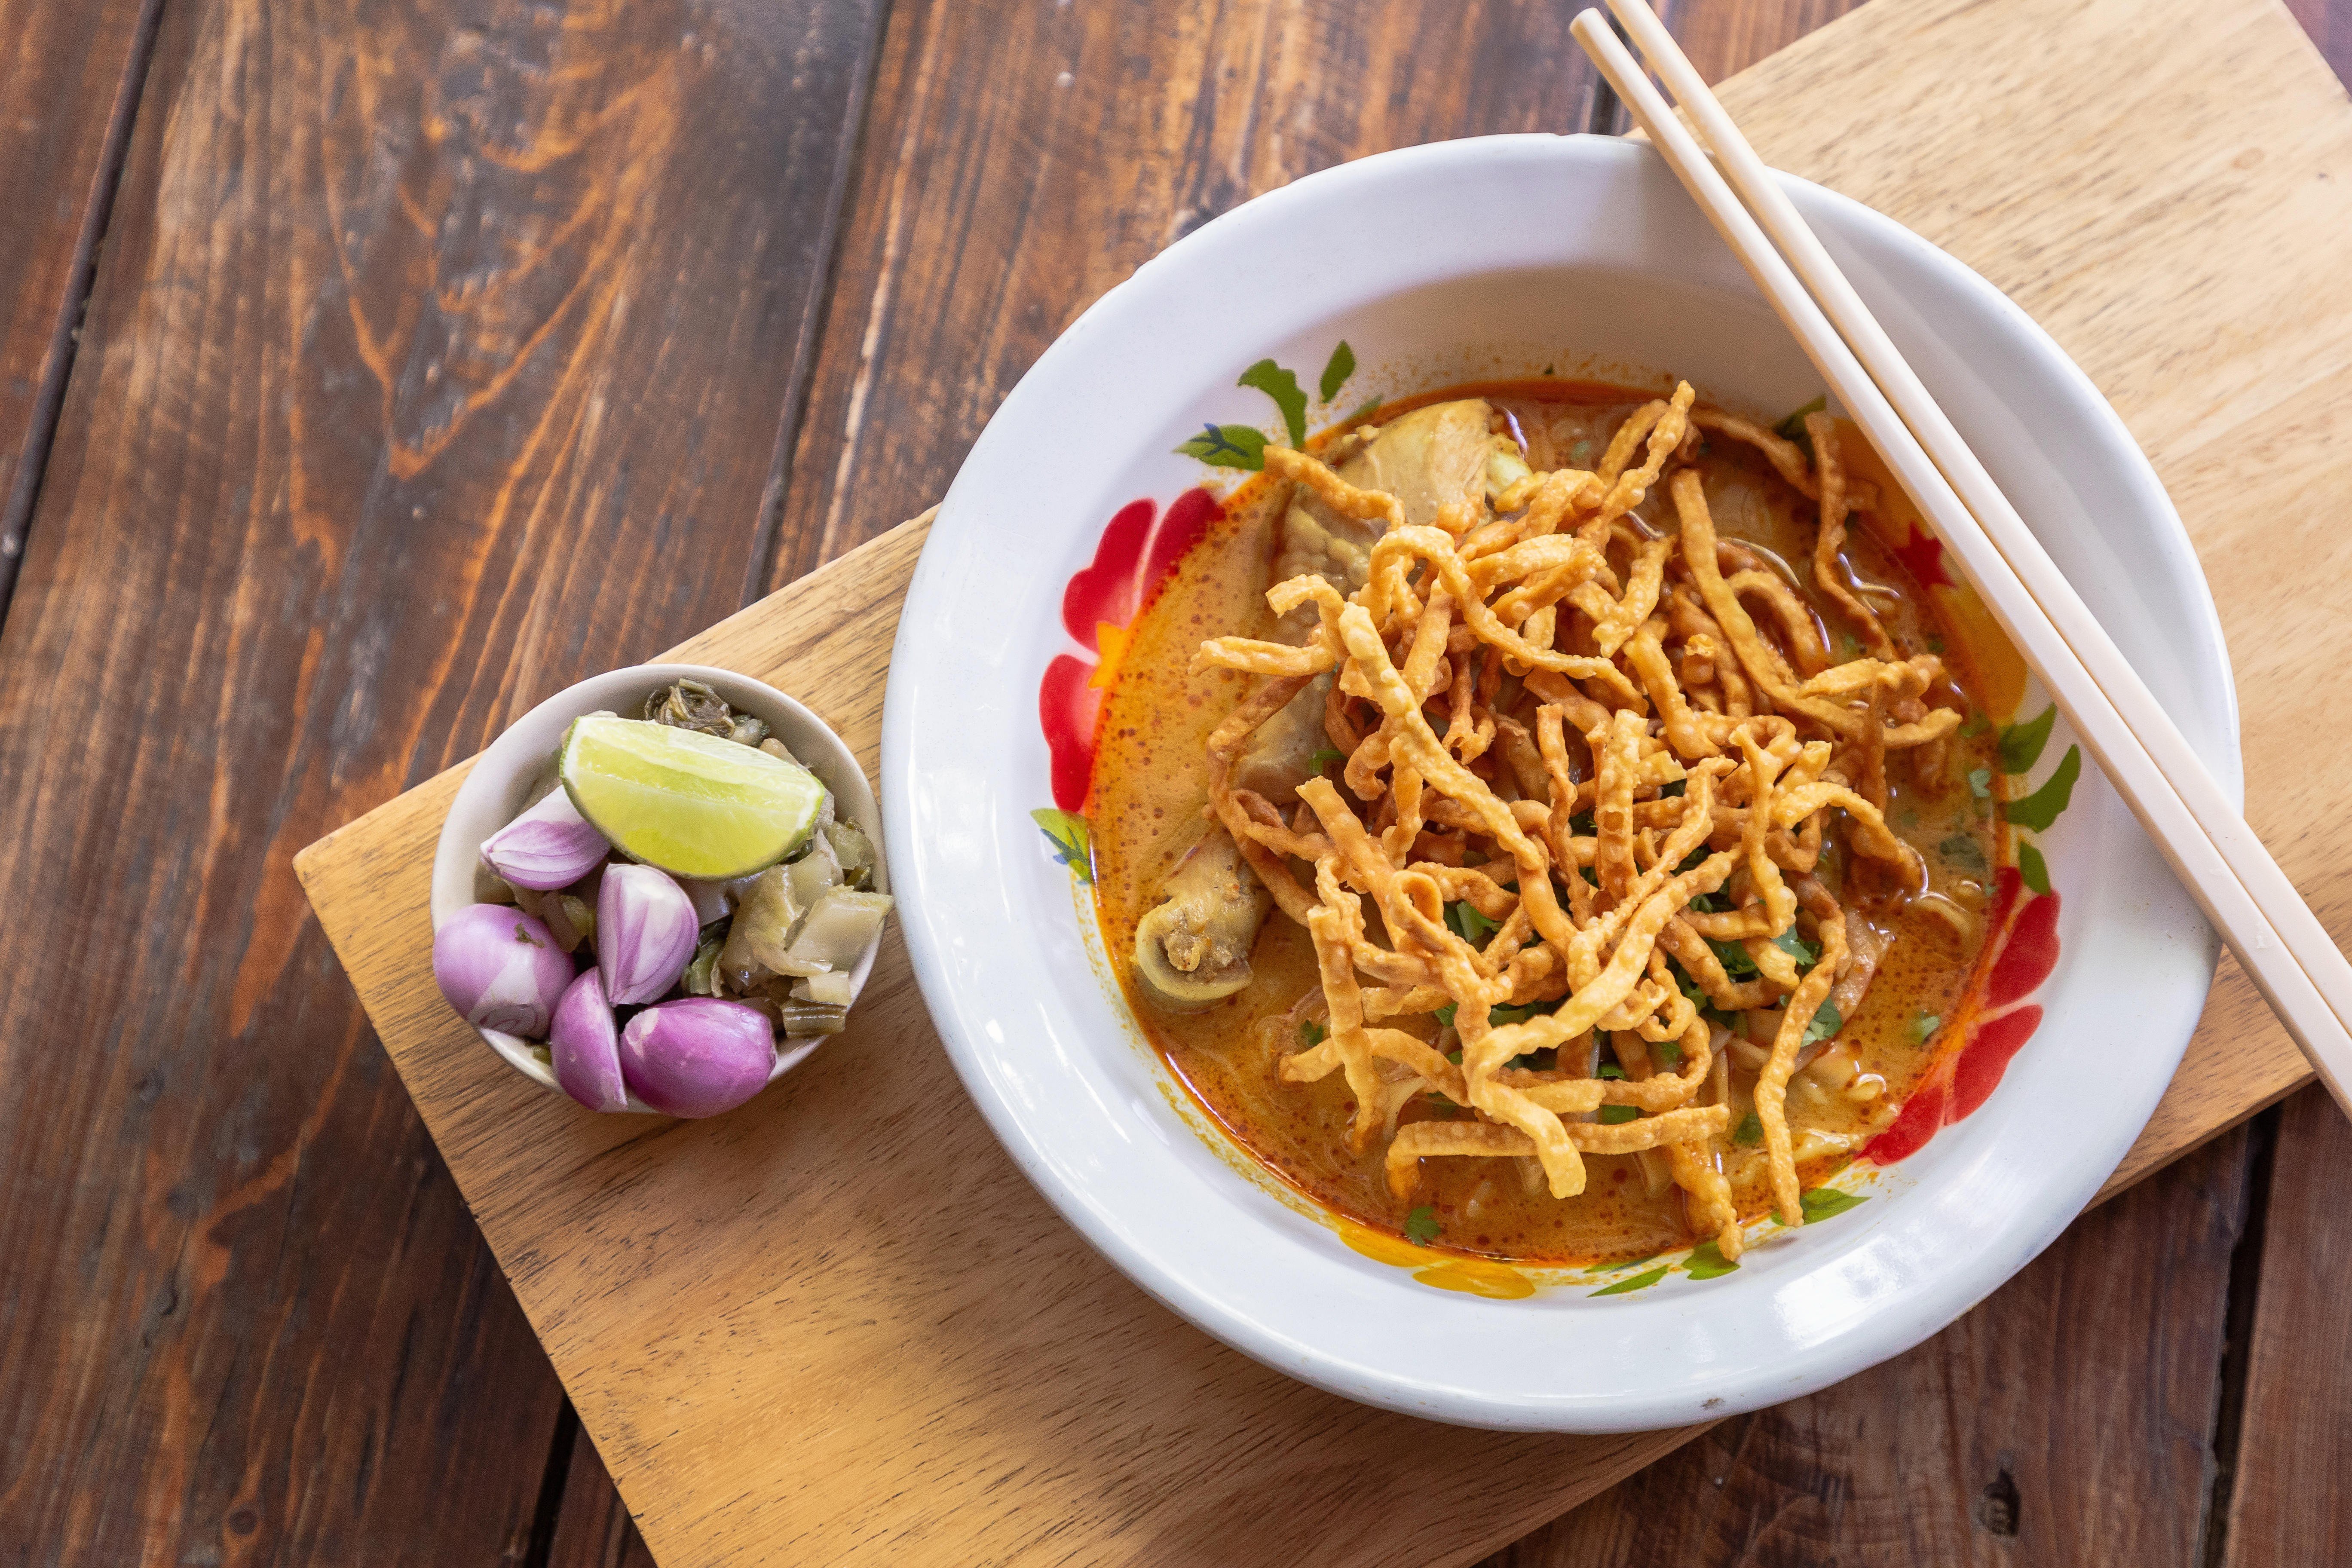 Curried noodle soup with chicken meat and spicy coconut milk is popular in Chiang Mai. Photo: Alamy